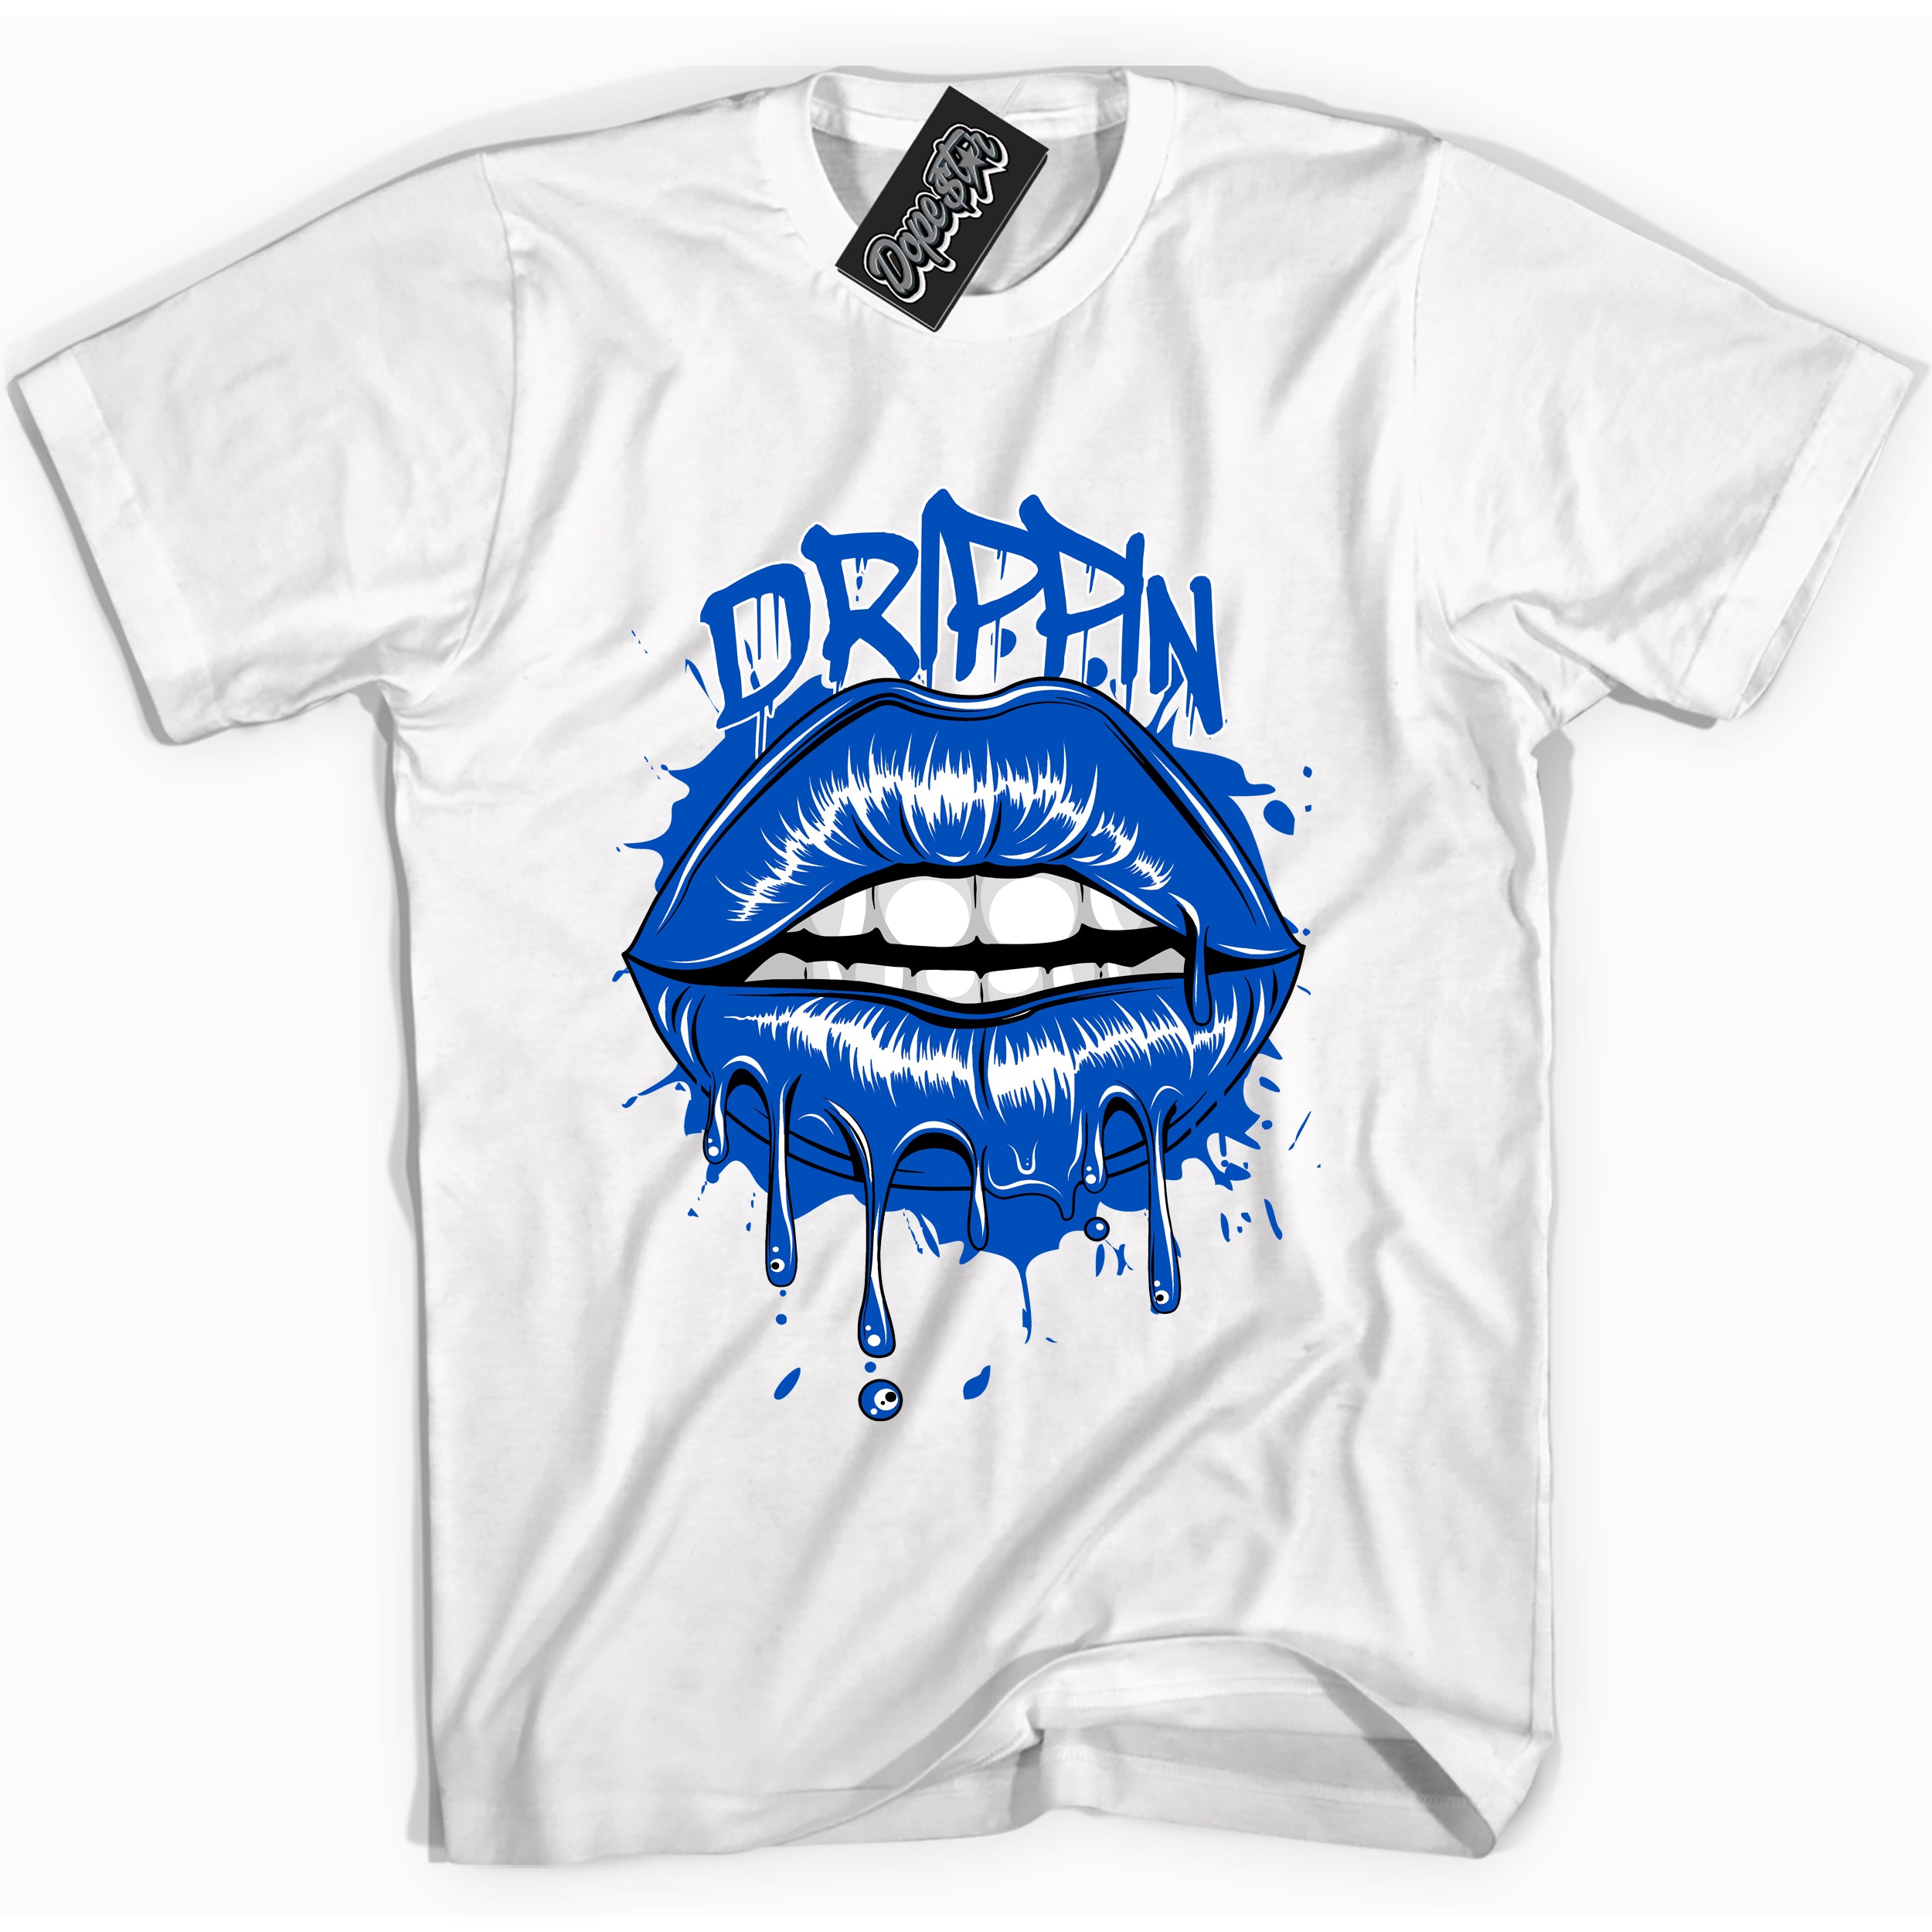 Cool White graphic tee with "Drippin" design, that perfectly matches Royal Reimagined 1s sneakers 